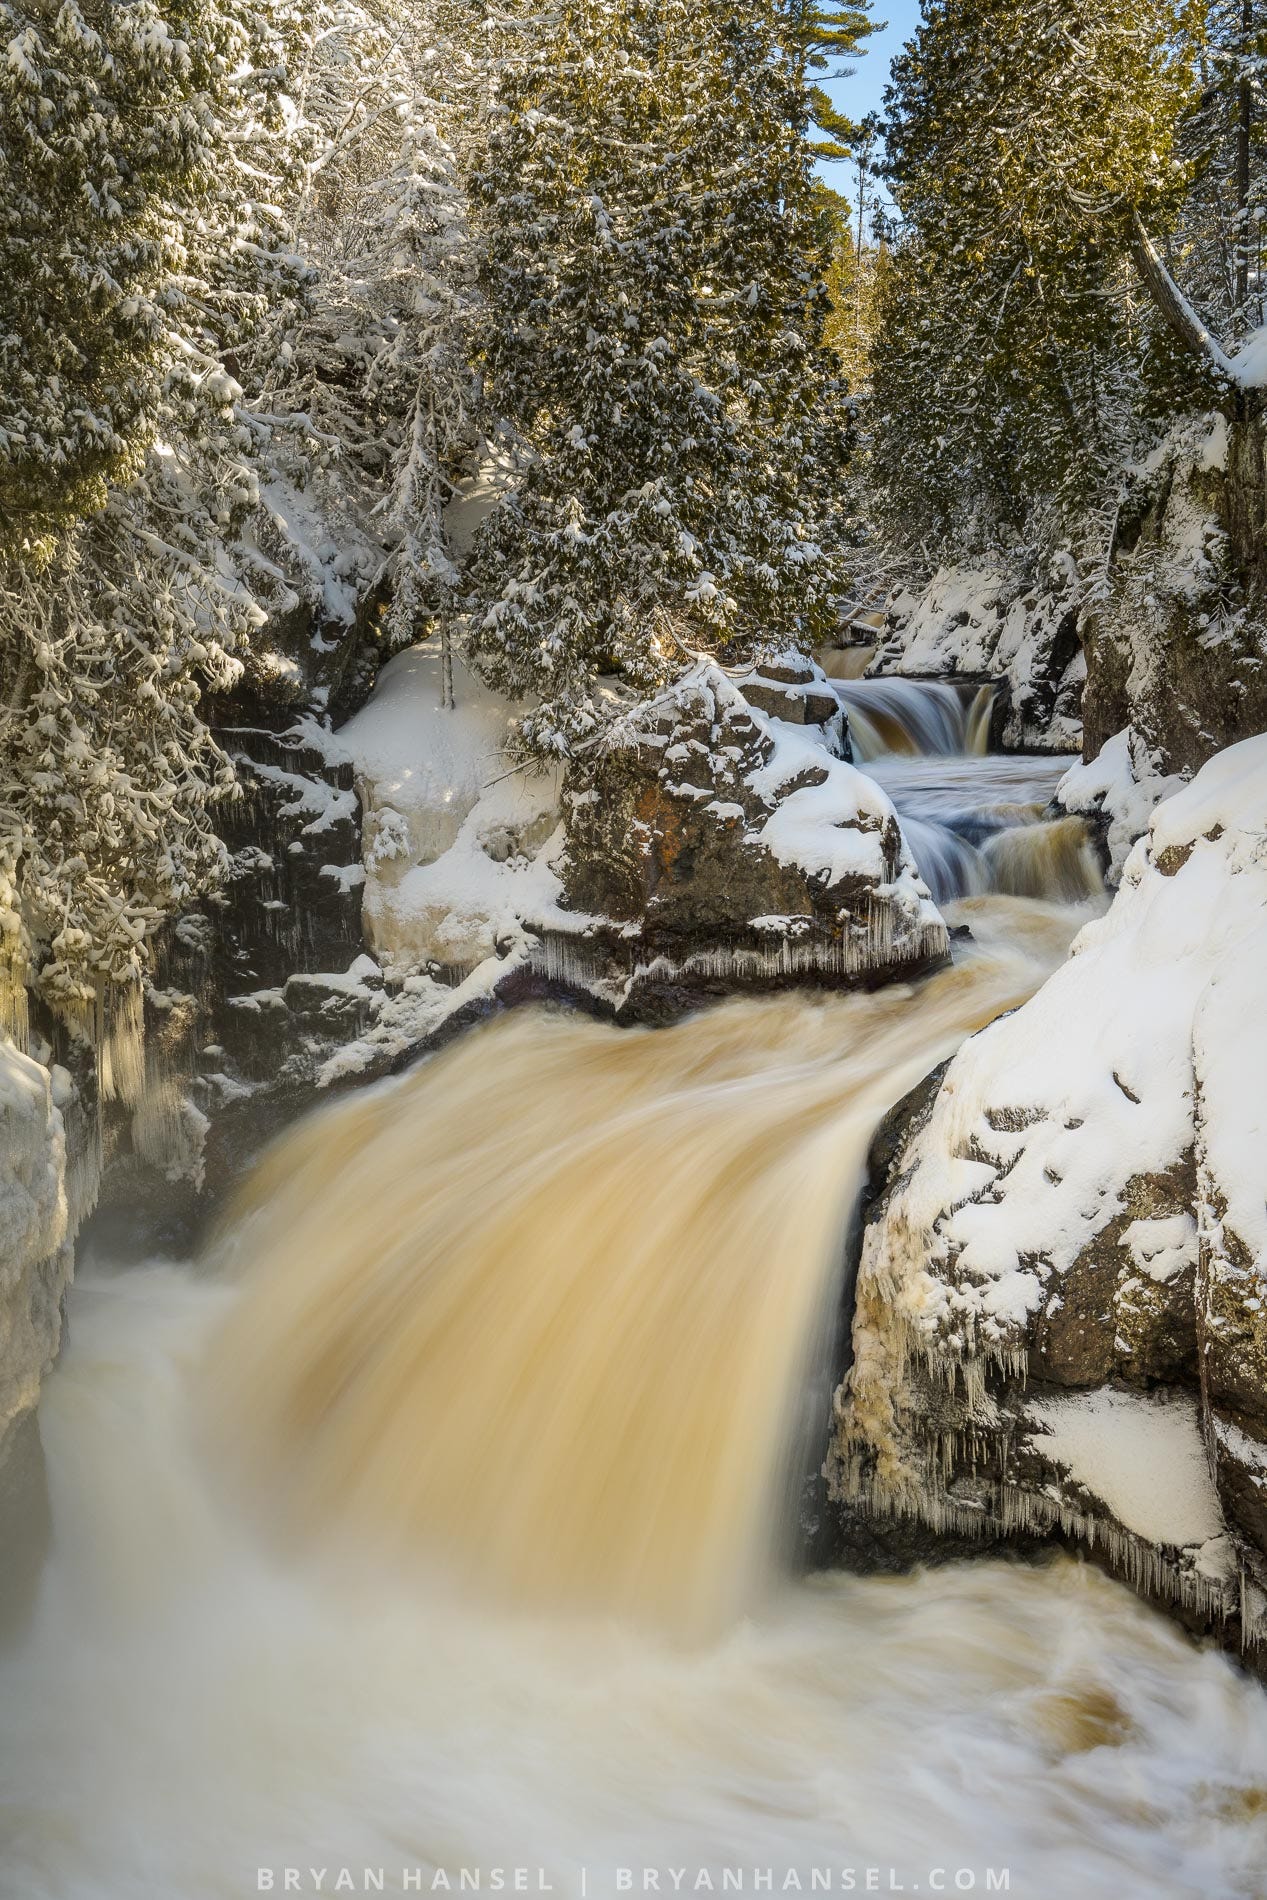 A waterfall surrounded by snow-covered trees and rocks. There's blue sky in the background.